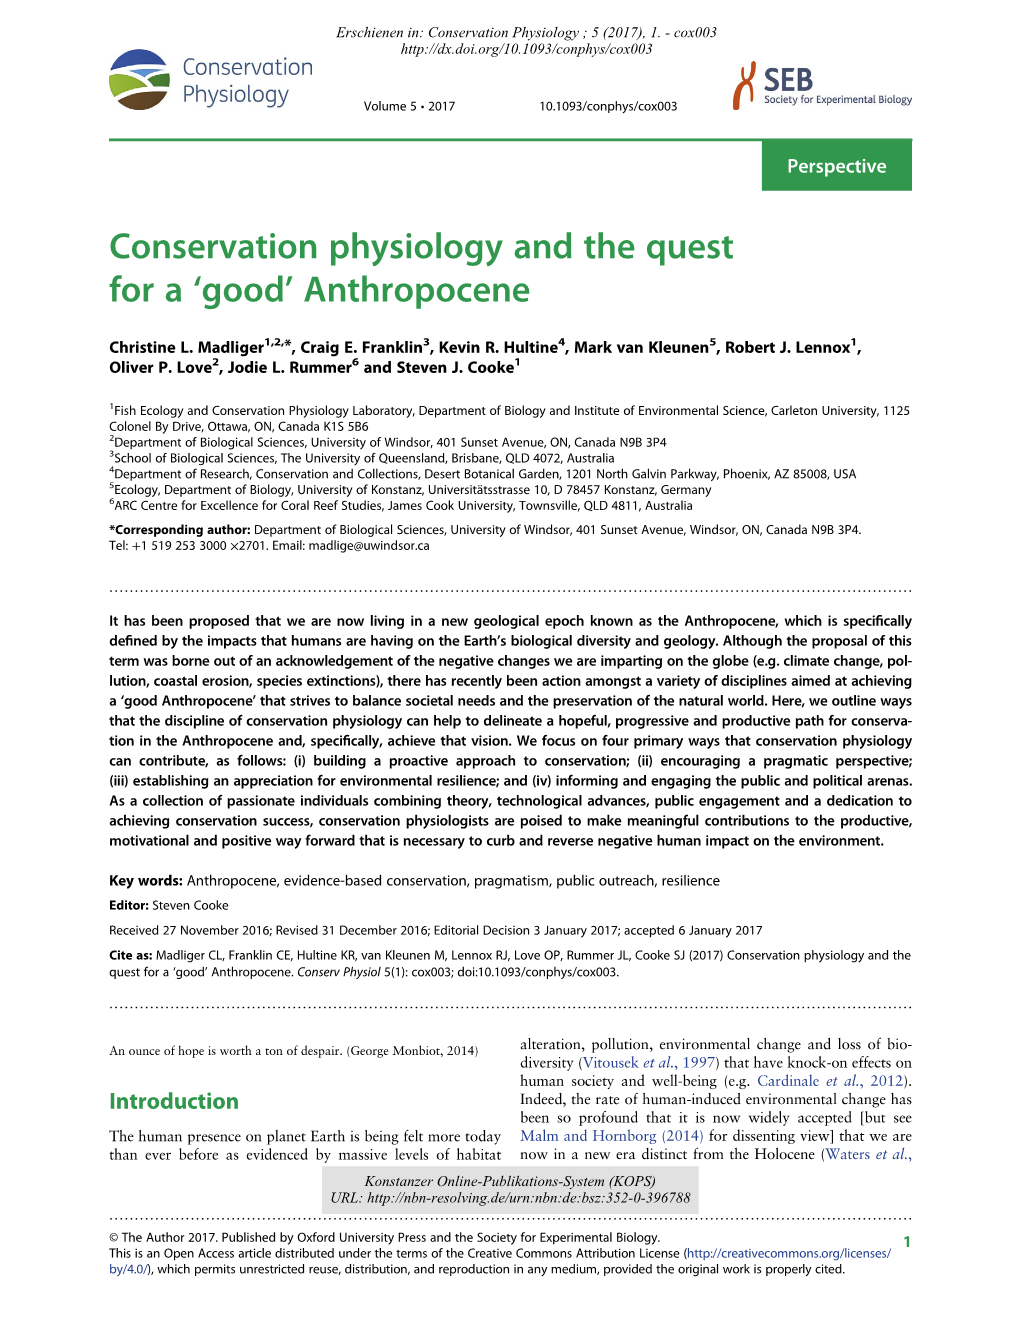 Conservation Physiology and the Quest for a 'Good' Anthropocene